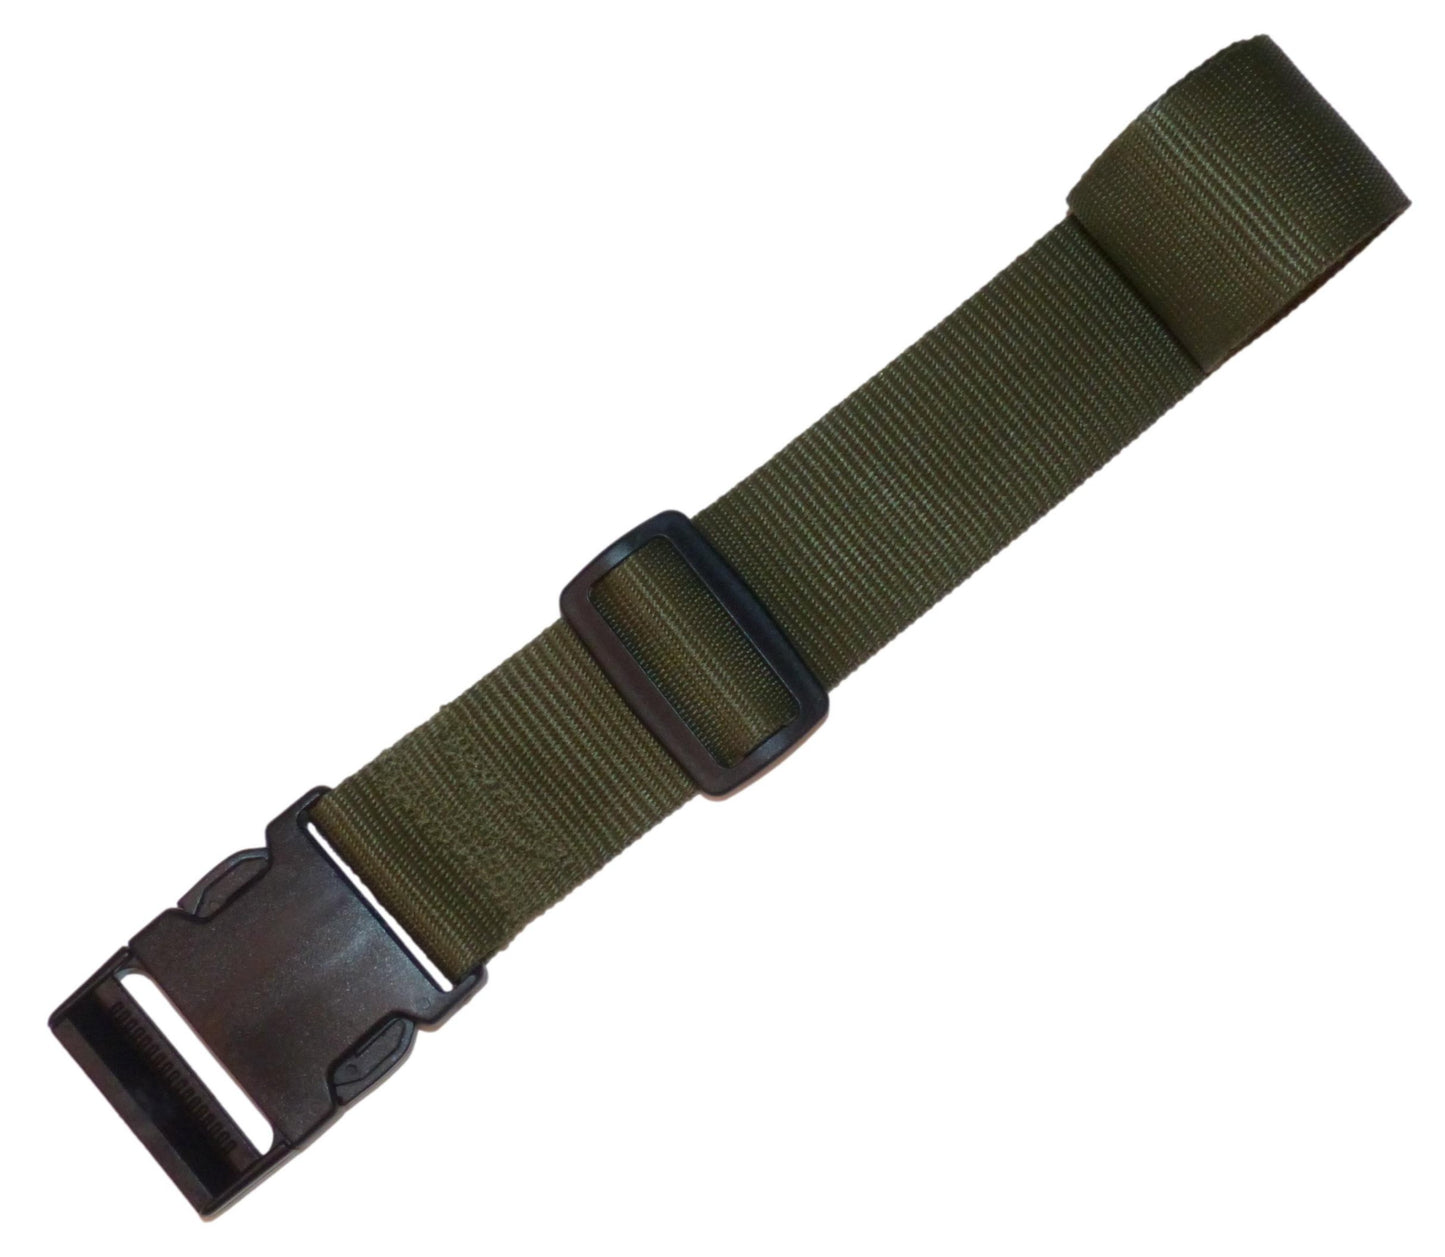 50mm Webbing Strap with Quick Release Buckle